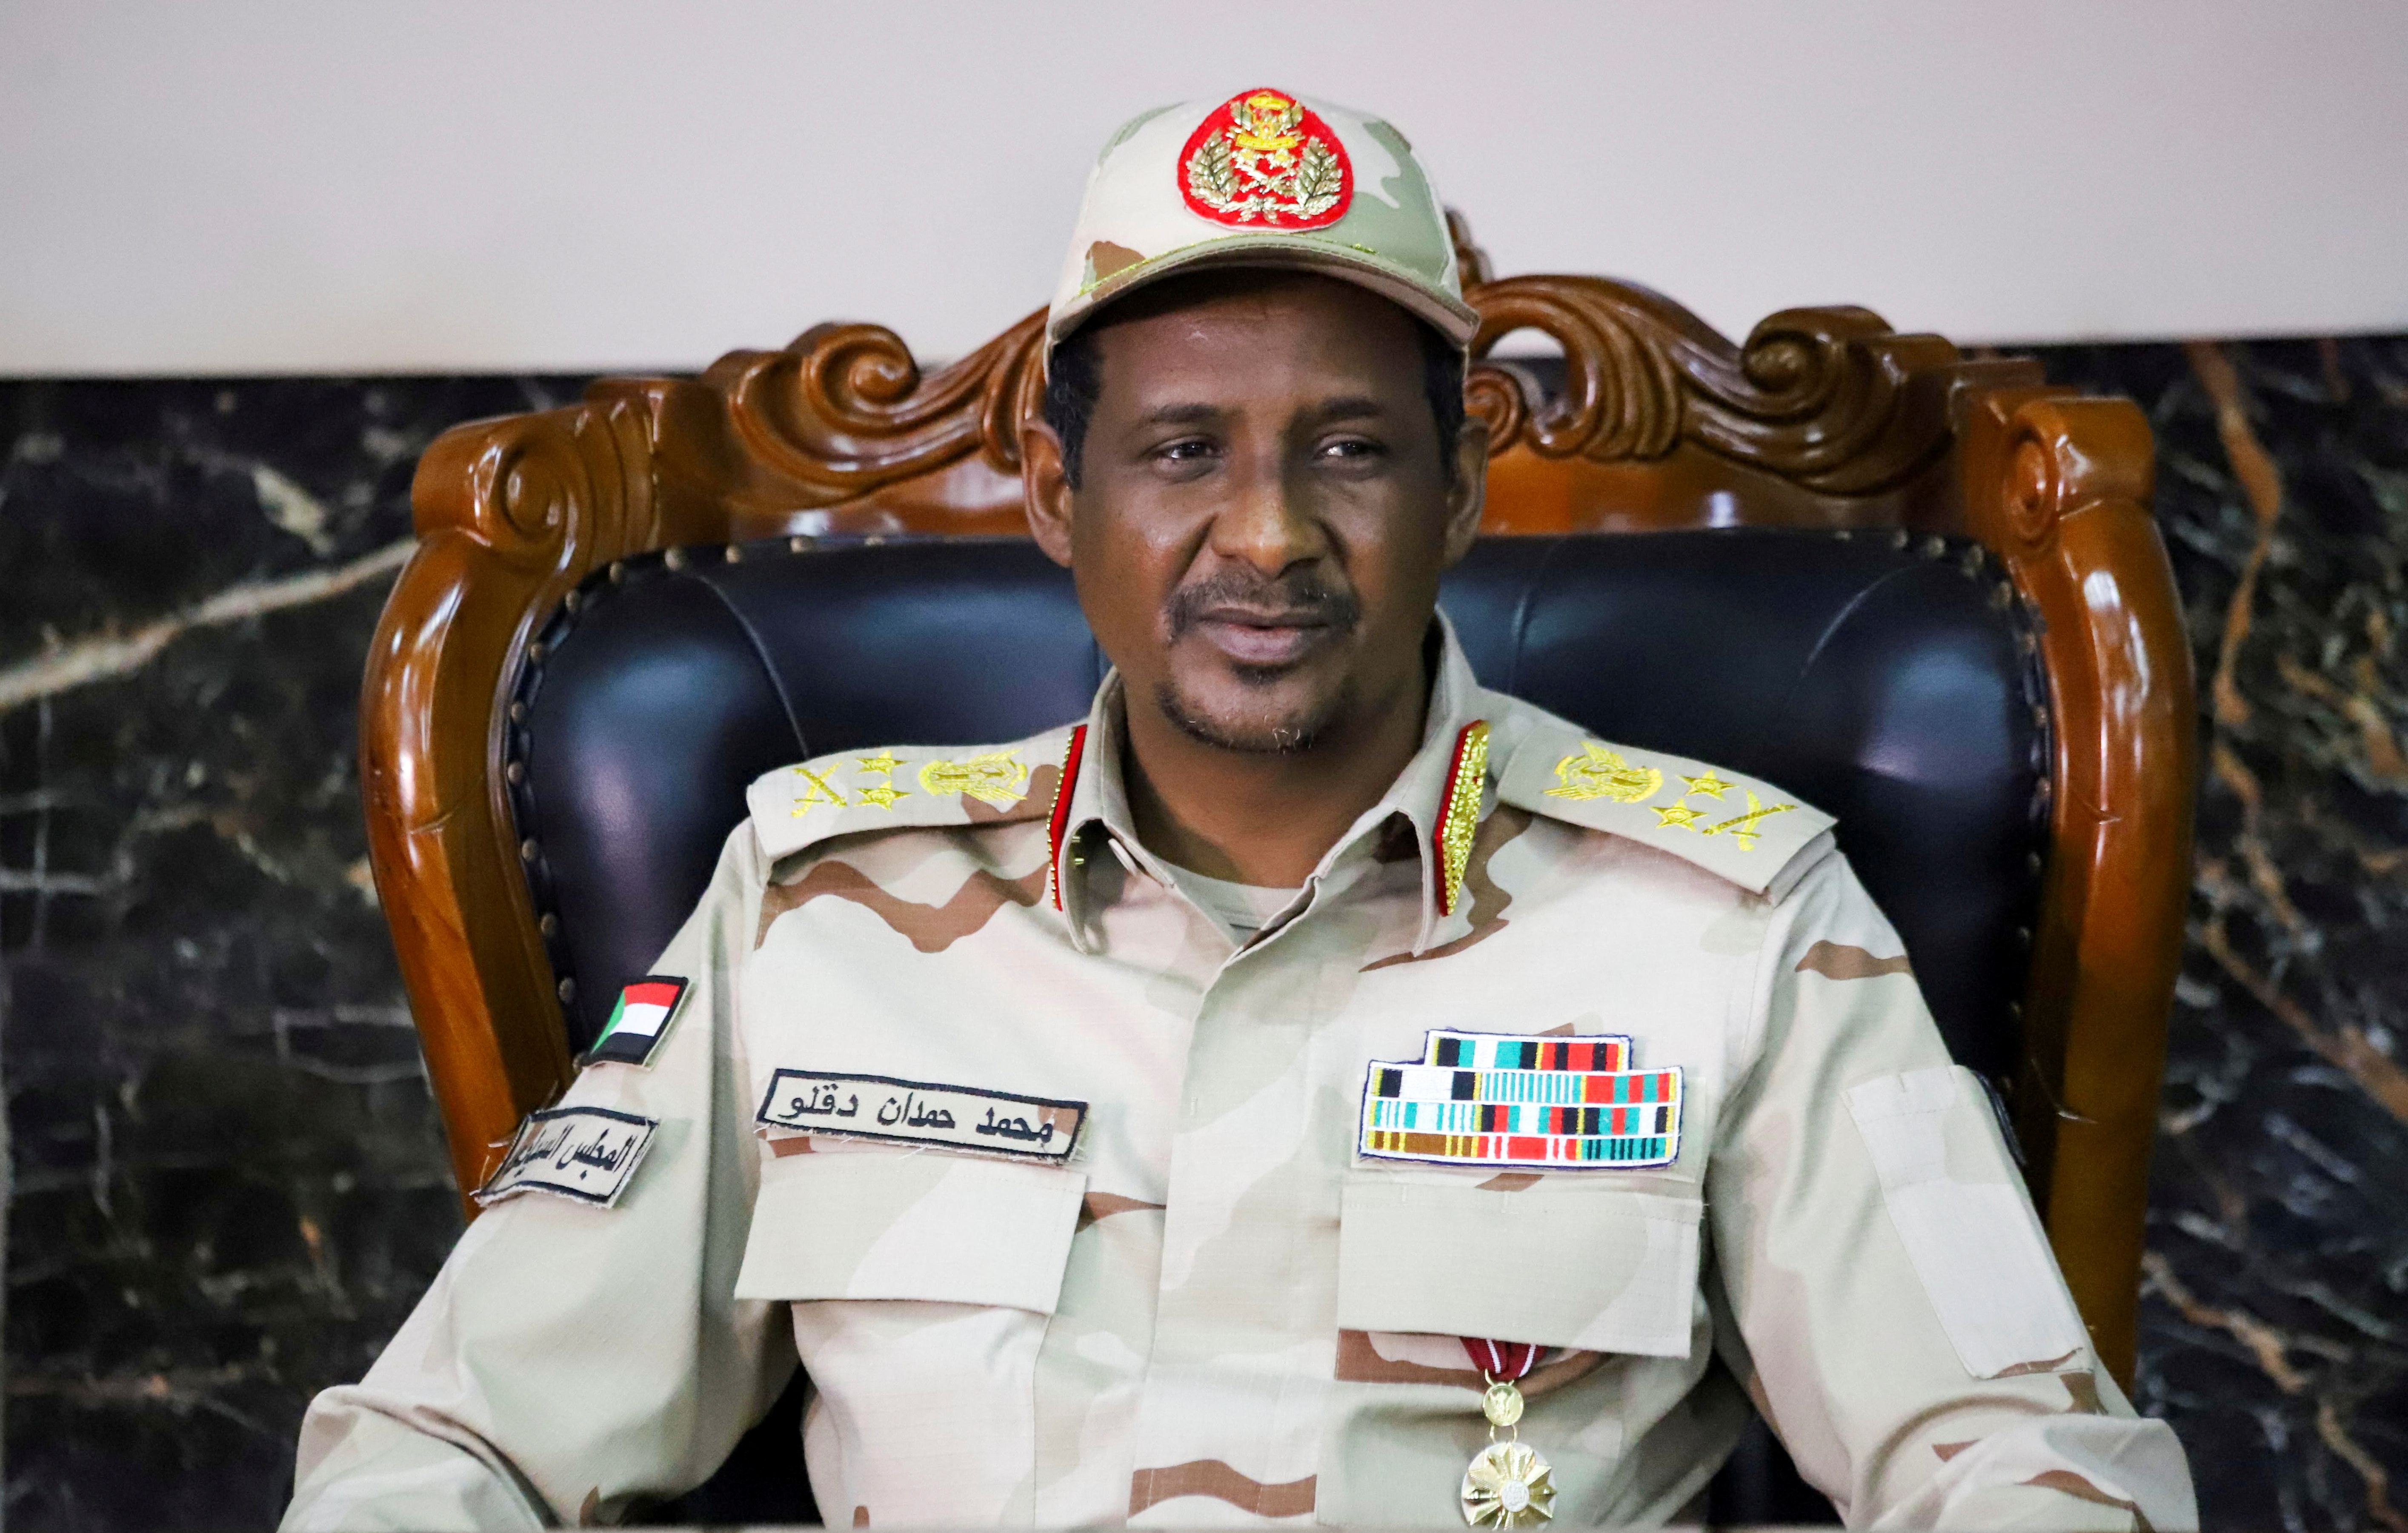 General Mohamed Hamdan Dagalo, Deputy Head of the Sudan Transitional Military Council, attends the signing ceremony of the agreement on peace and ceasefire in Juba